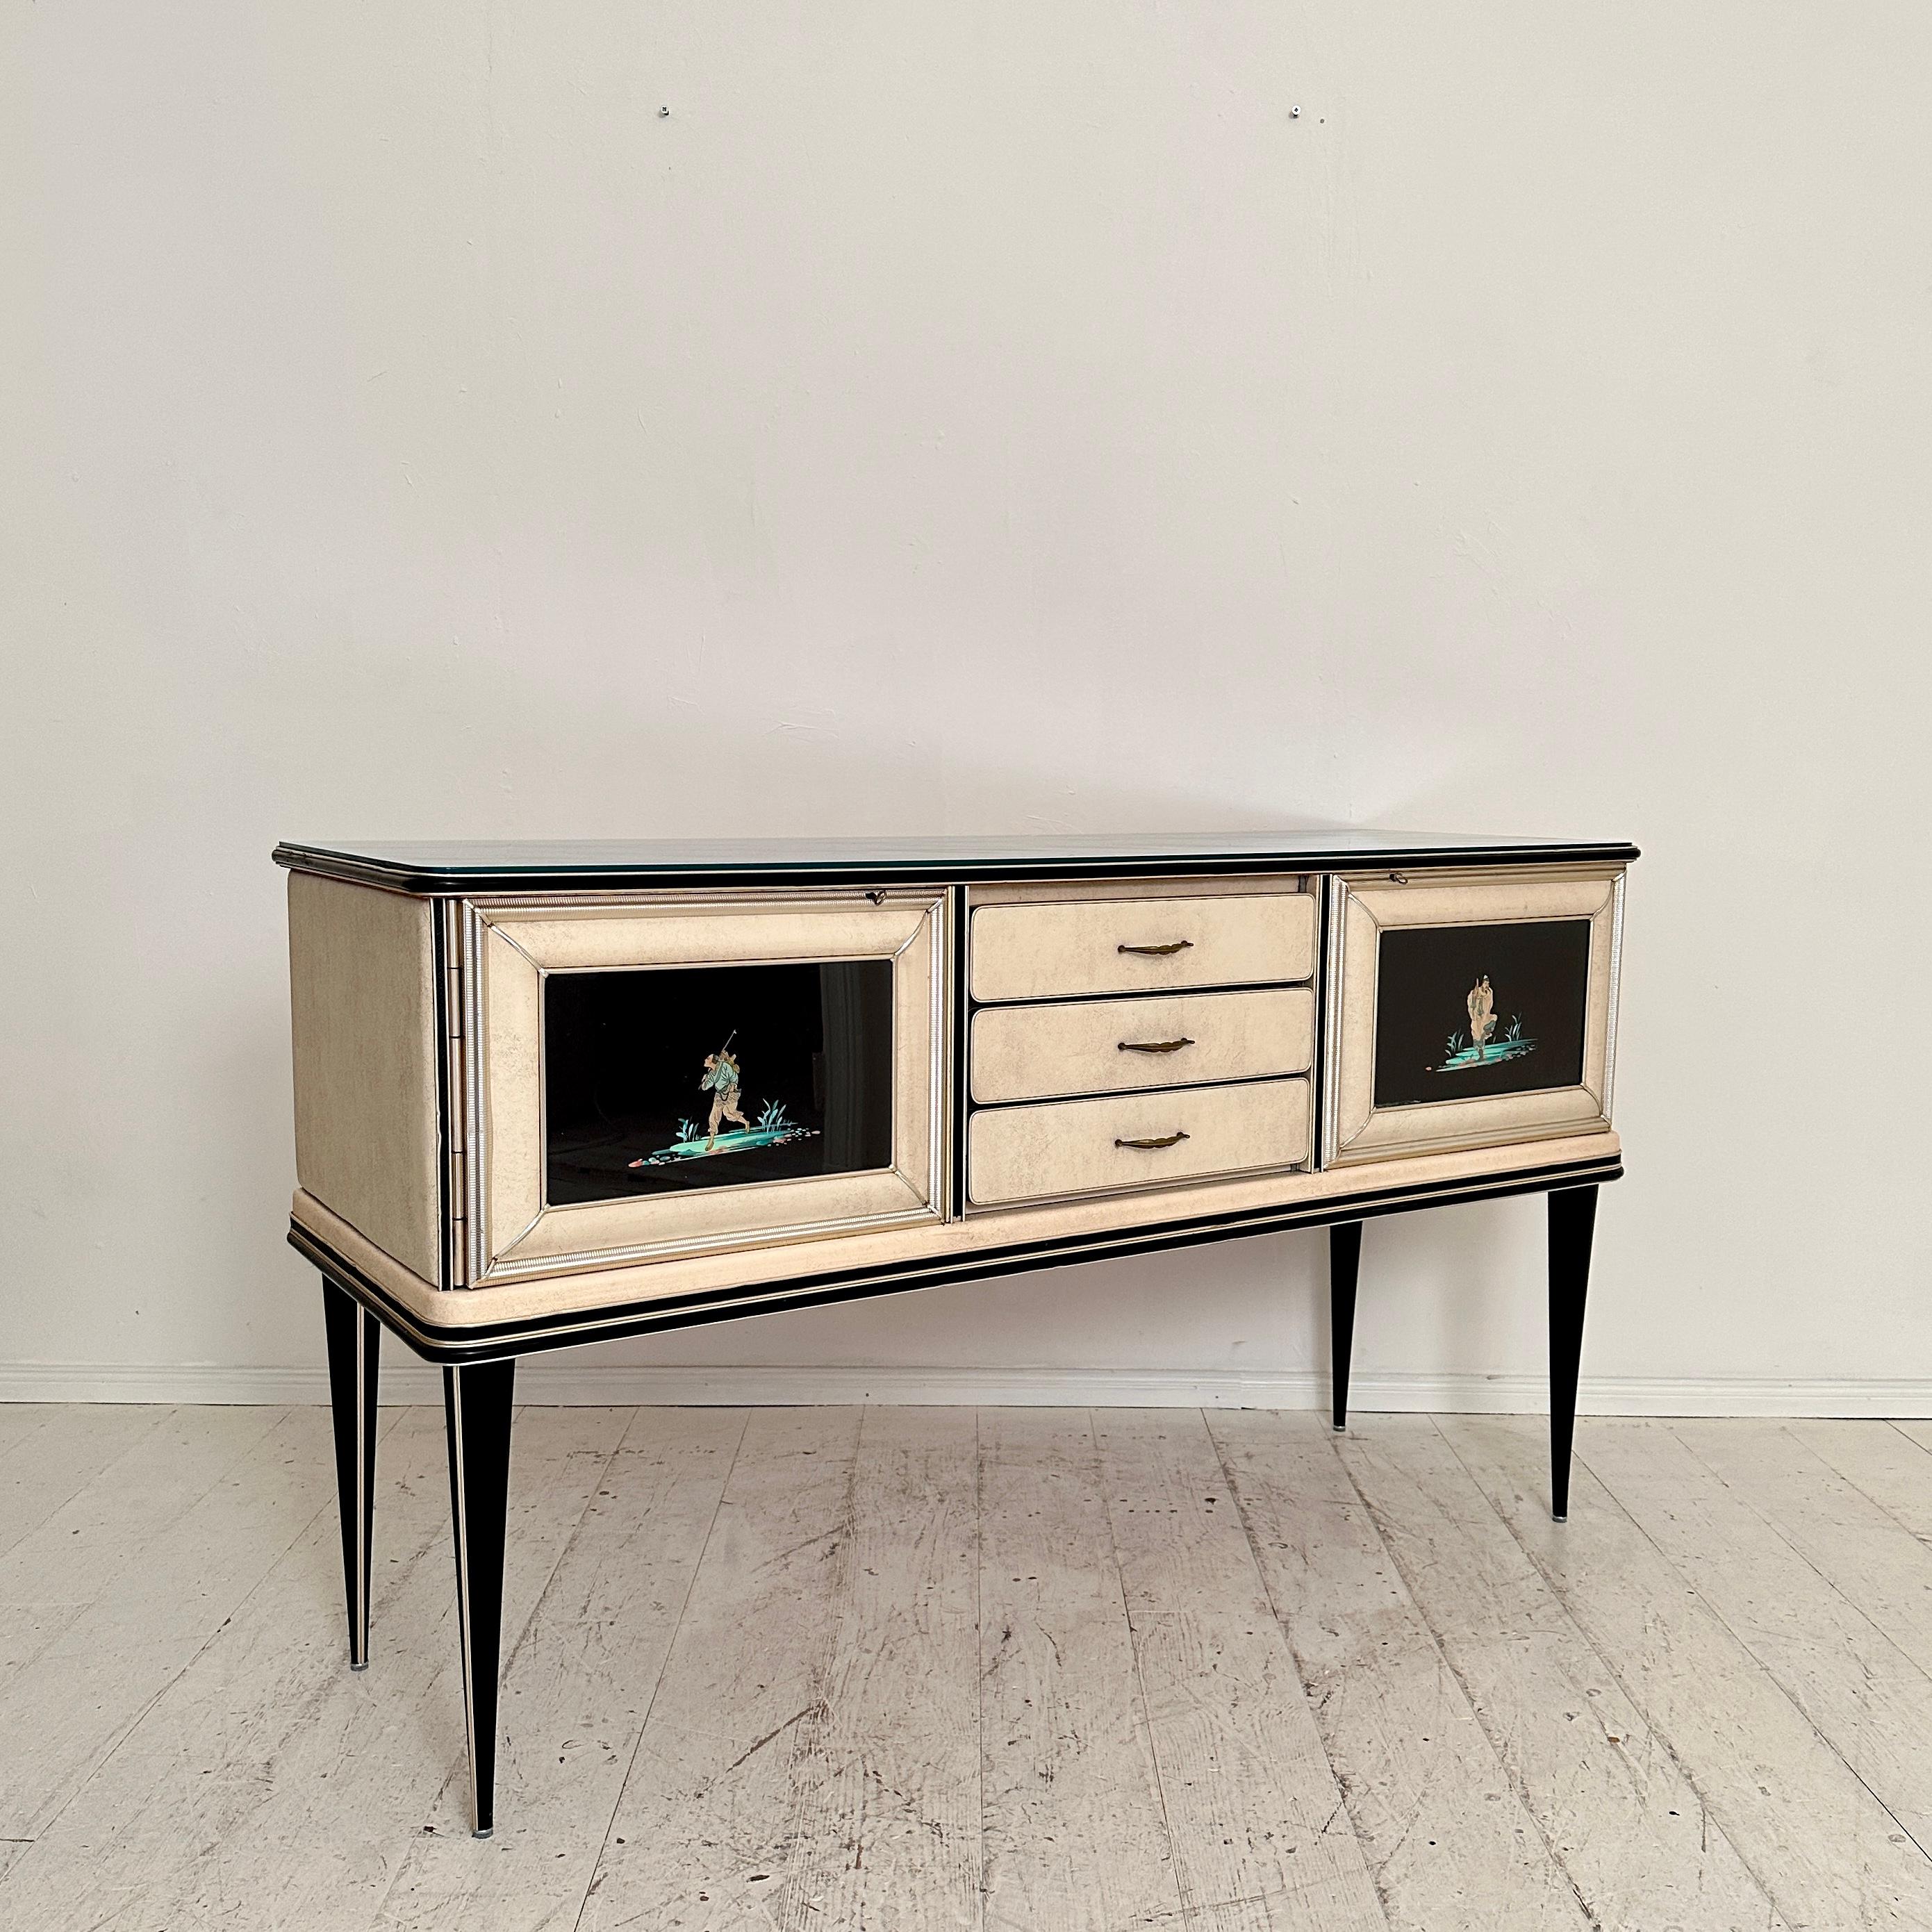 Mid-Century Chinoserie Sideboard by Umberto Mascagni for Harrods London, 1953 For Sale 4